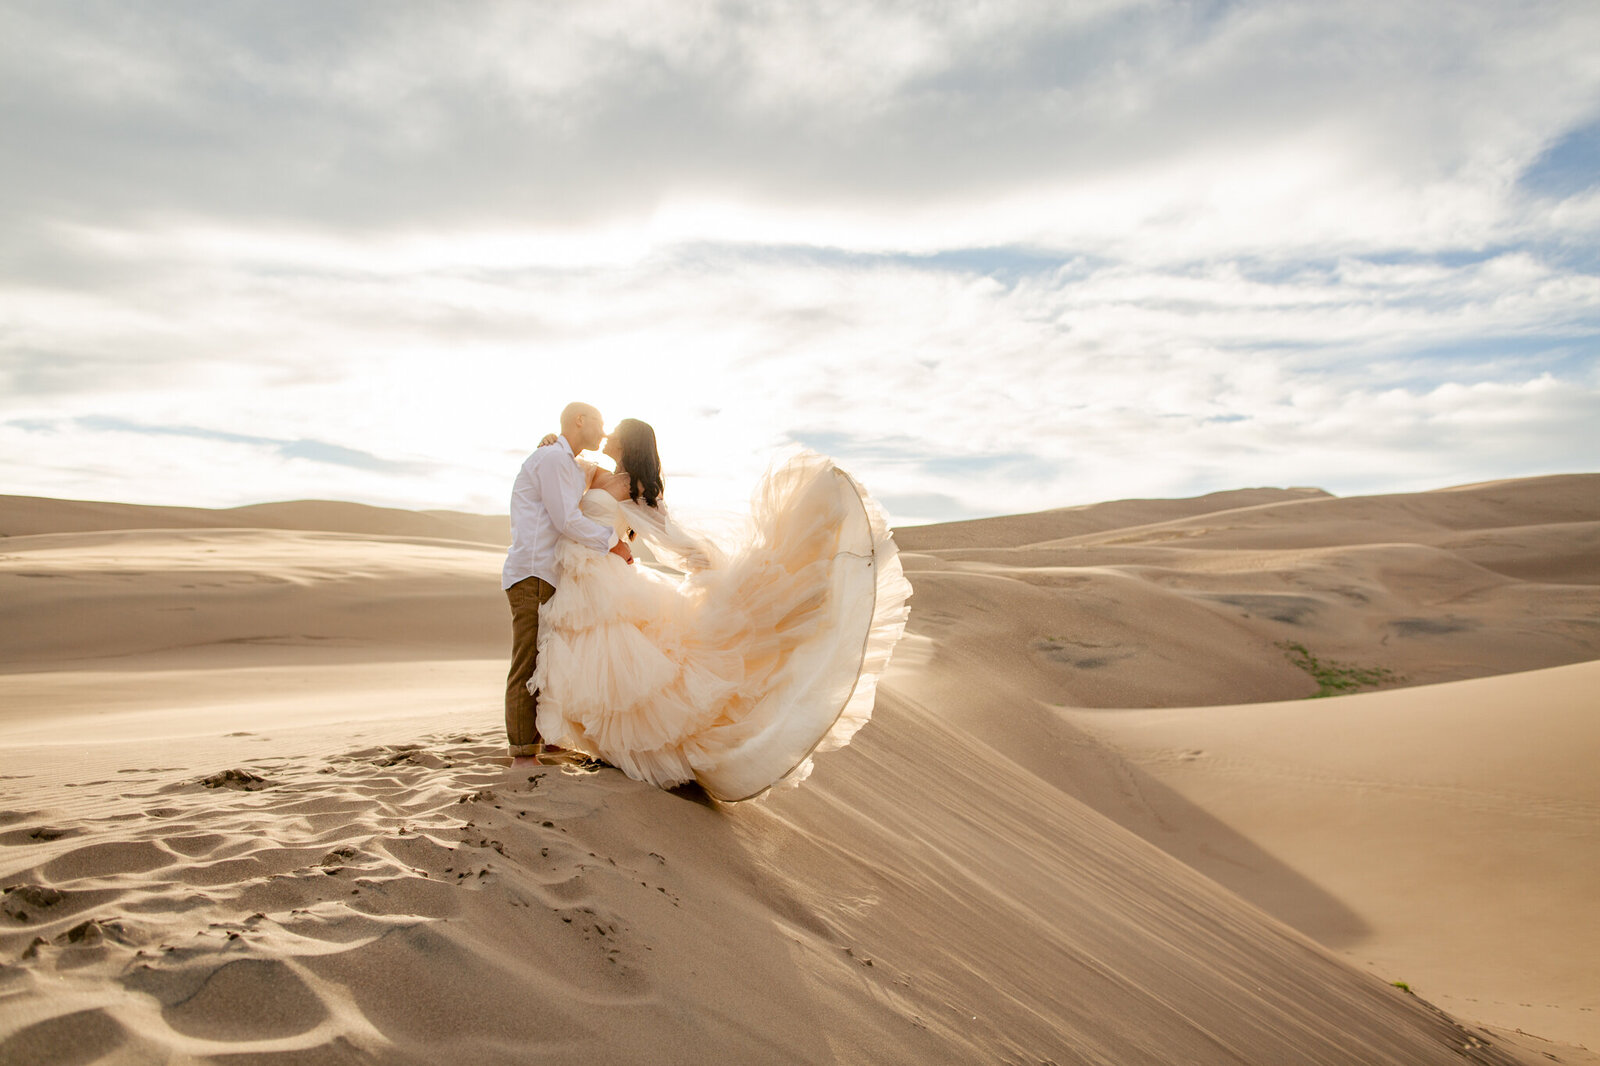 Bride flips up her wedding dress into the wind while hugging the groom on the top of a sand dune